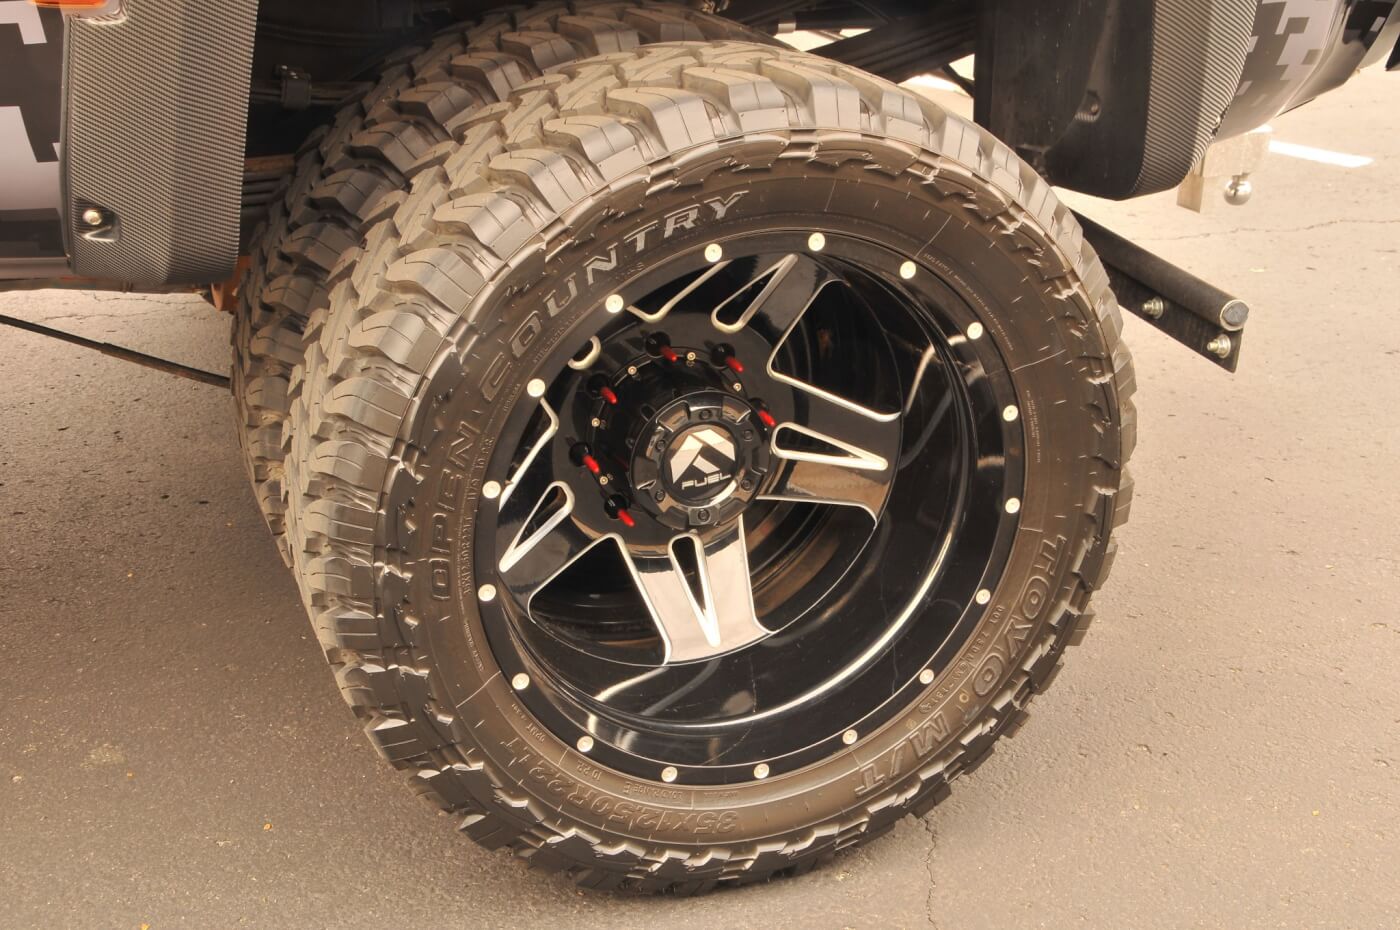 The wheels are 22-inch Fuel Full Blown models with lug nuts that look like .50-caliber bullets (from V&V Concepts). Toyo Open Country M/T tires provide lots of traction for any offroad excursions and are relatively quiet on the highway.